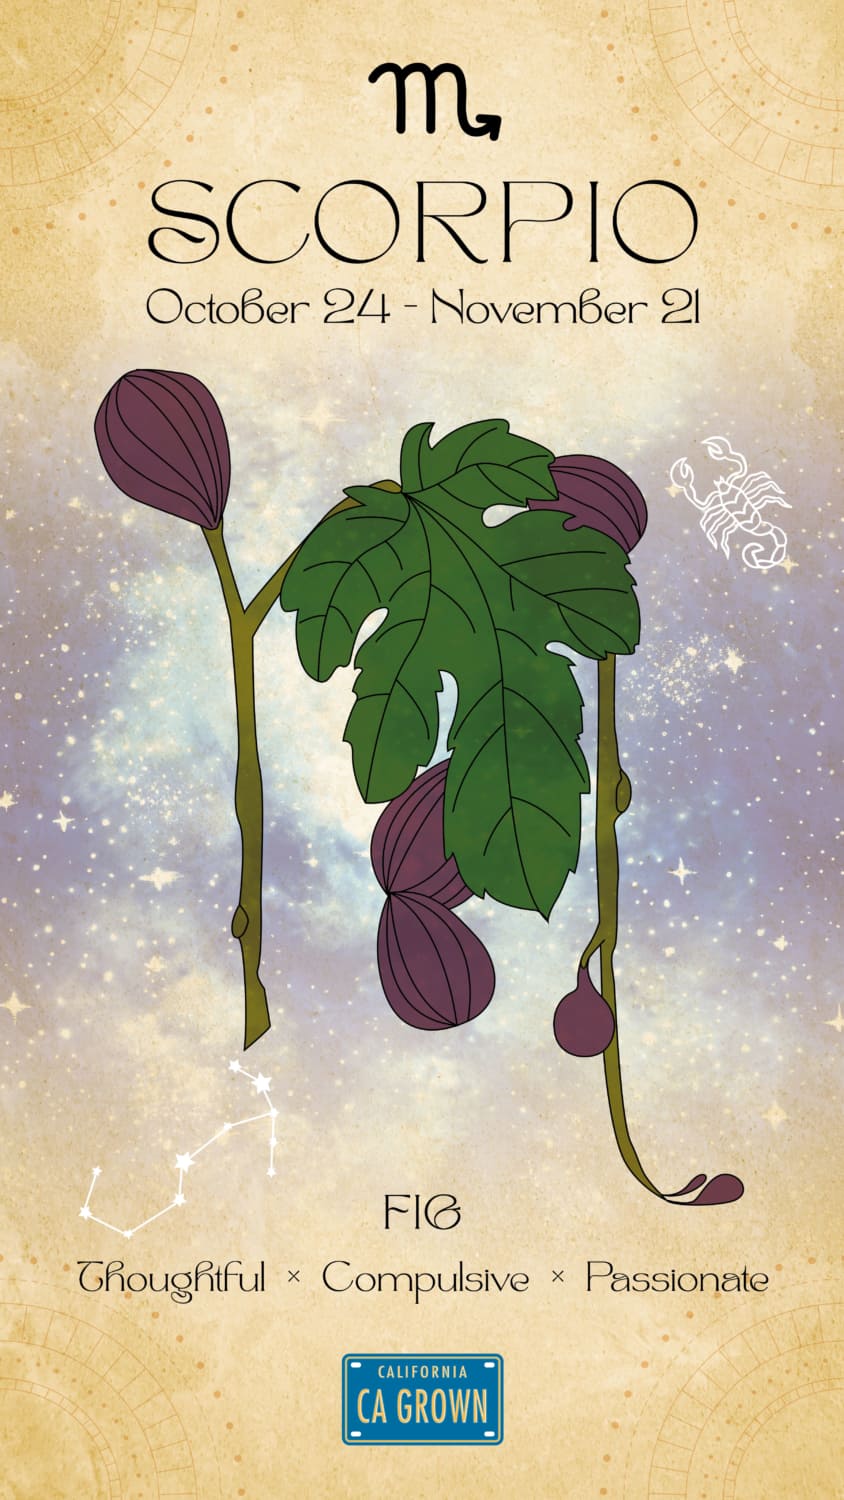 Scorpios are represented by Figs in our crop zodiac